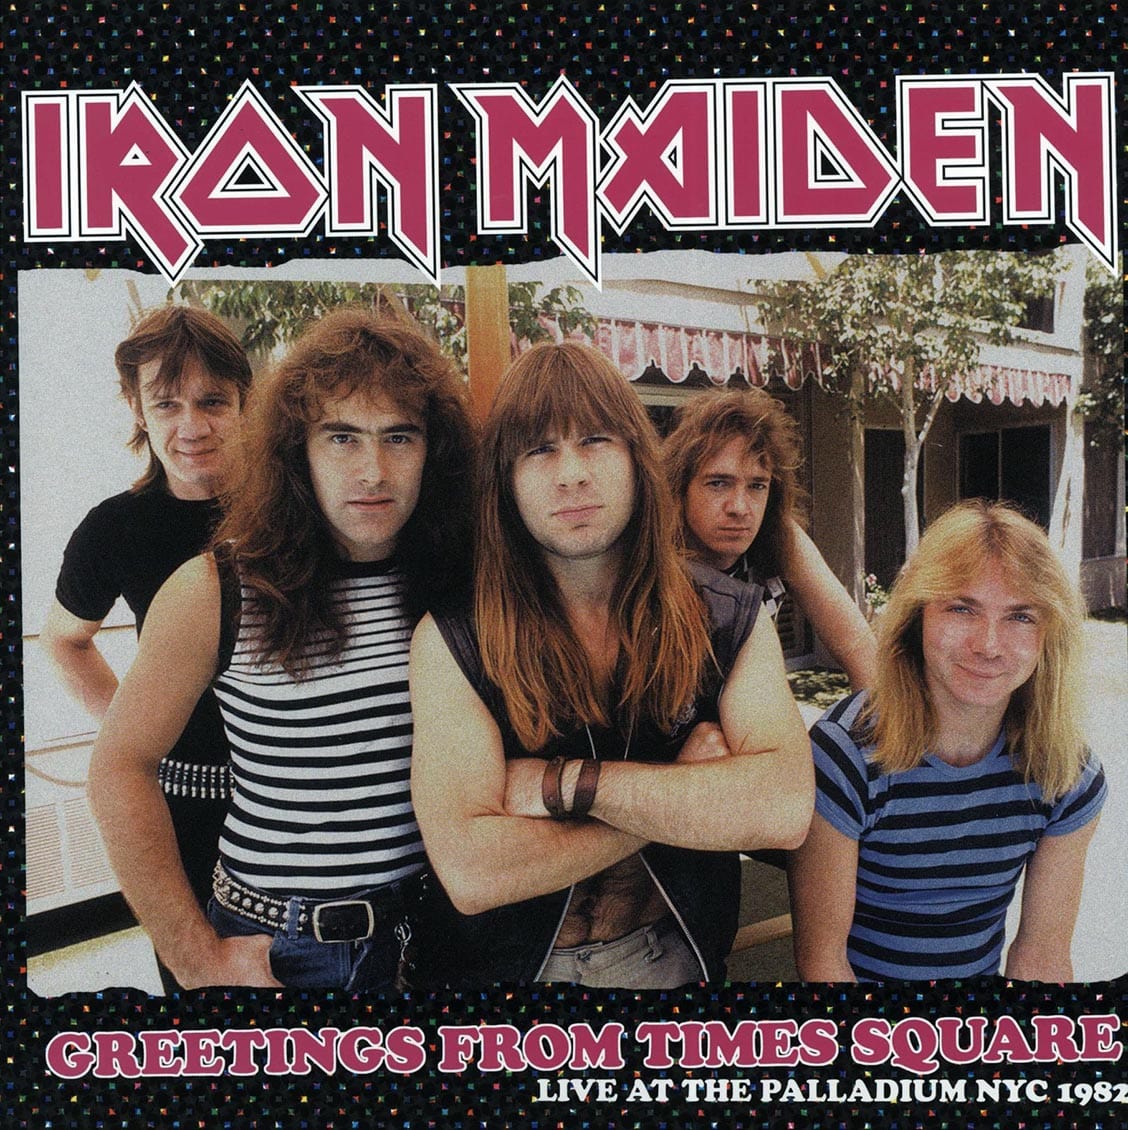 IRON MAIDEN: Greetings From Times Square - Live At The Palladium, NYC June 29th, 1982 LP